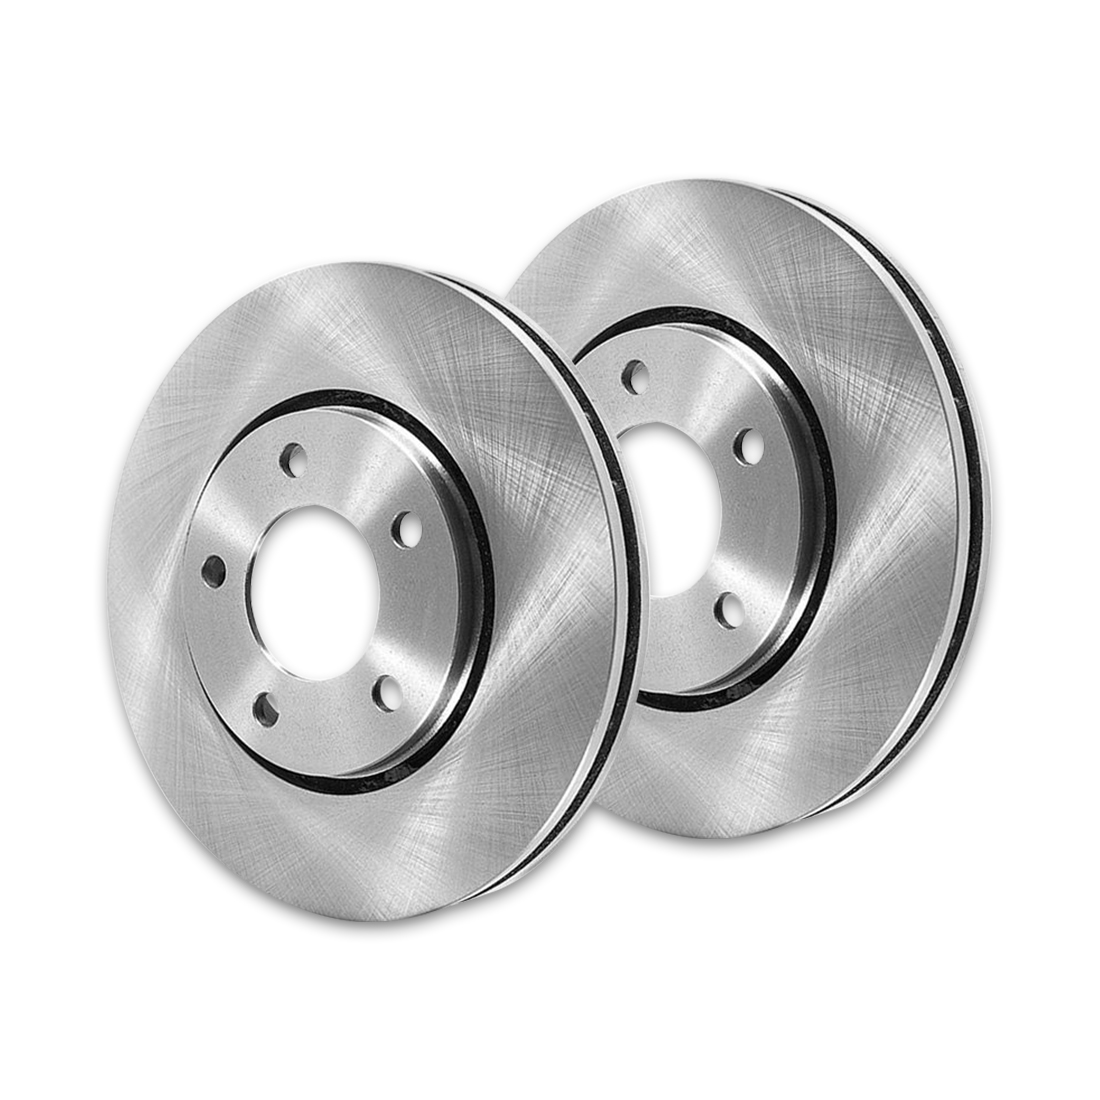 Centric Parts Centric Front Brake Rotors 2PCS For 1974-1989 Land Rover Range Rover